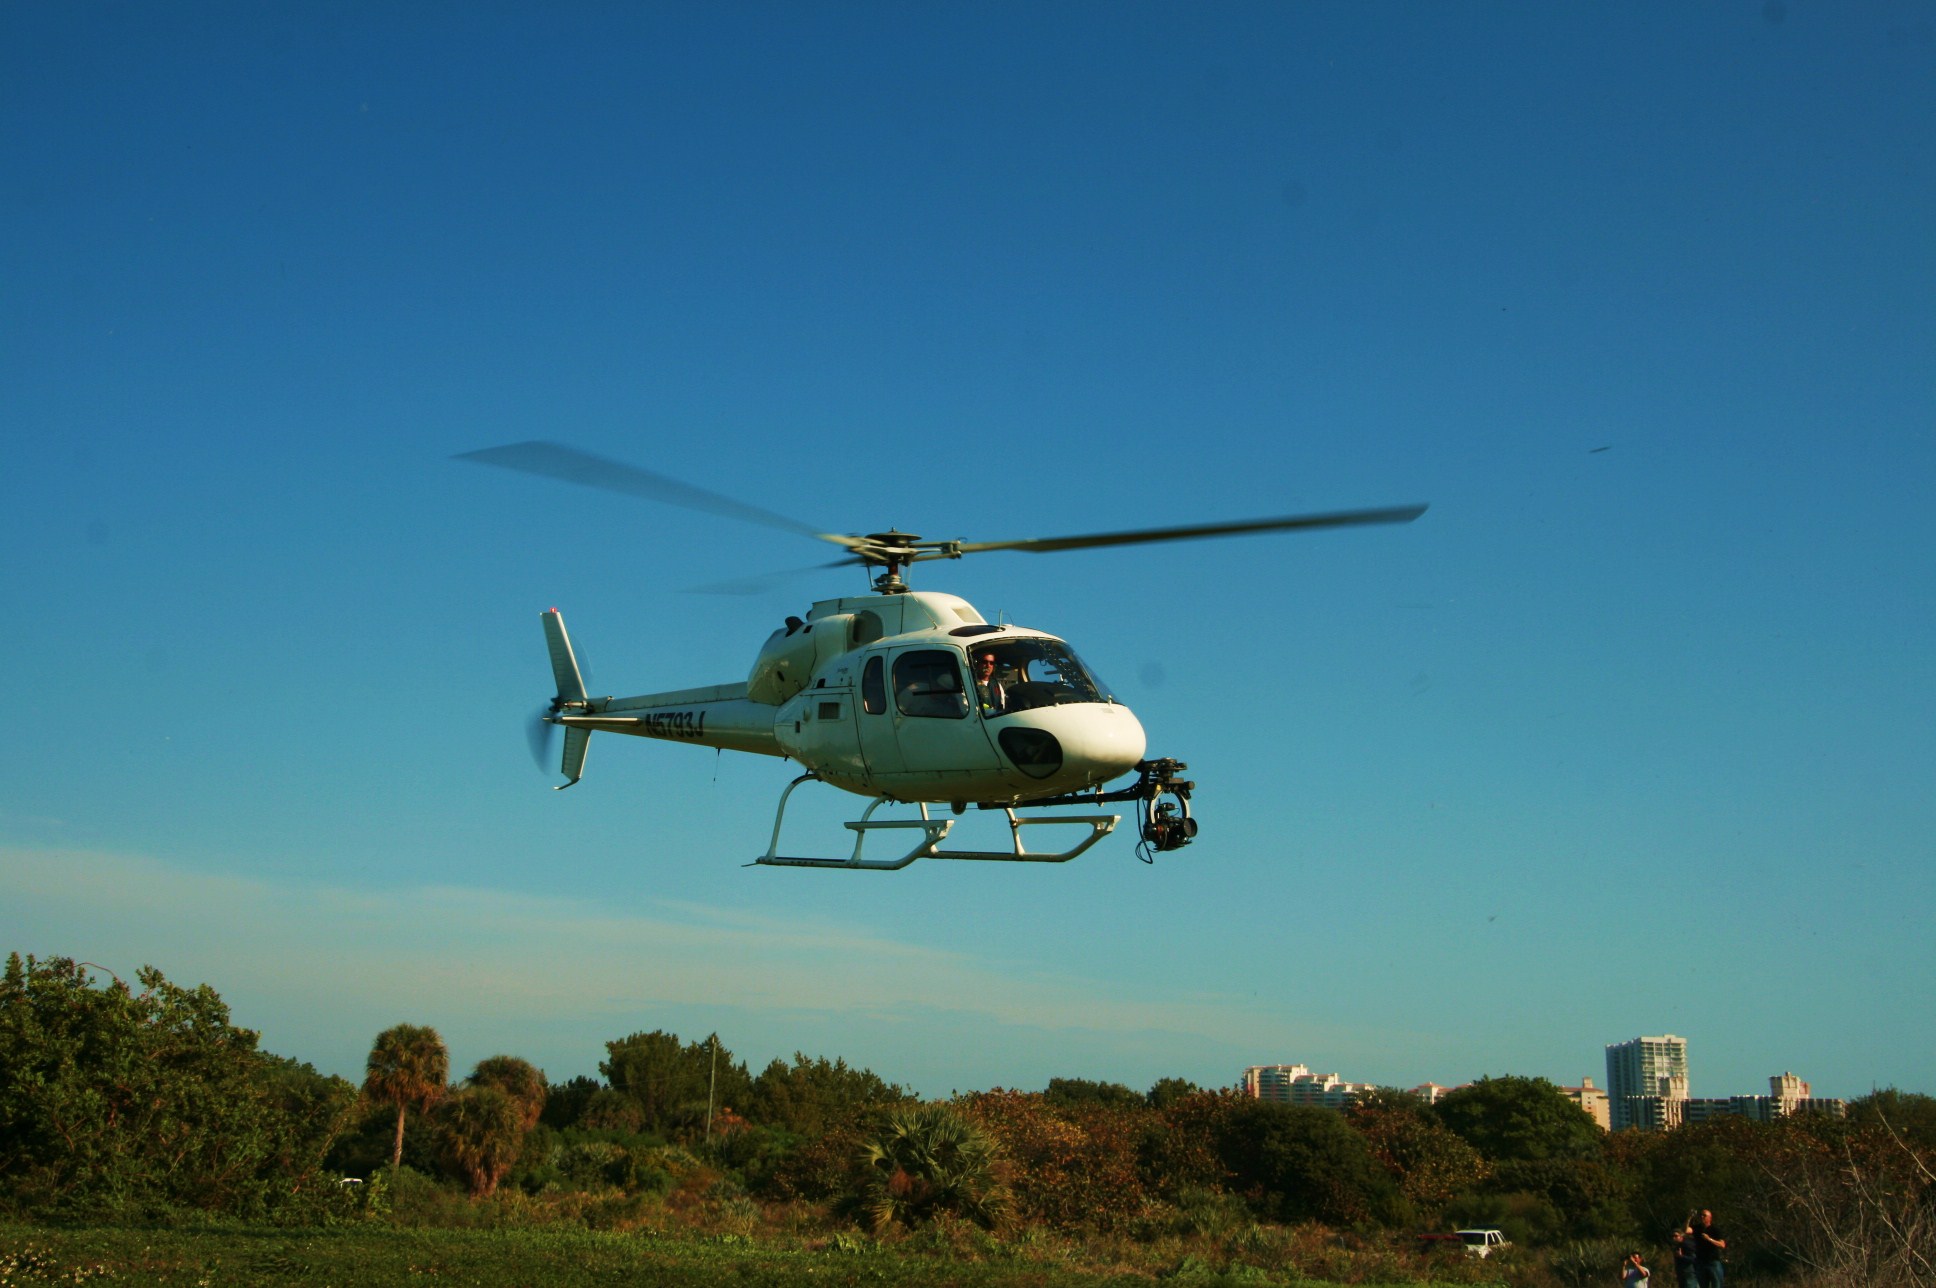 Camera Copters AS355F1 piloted by Paul Barth and equipped with a 35 MM Arri cam on Libra Head